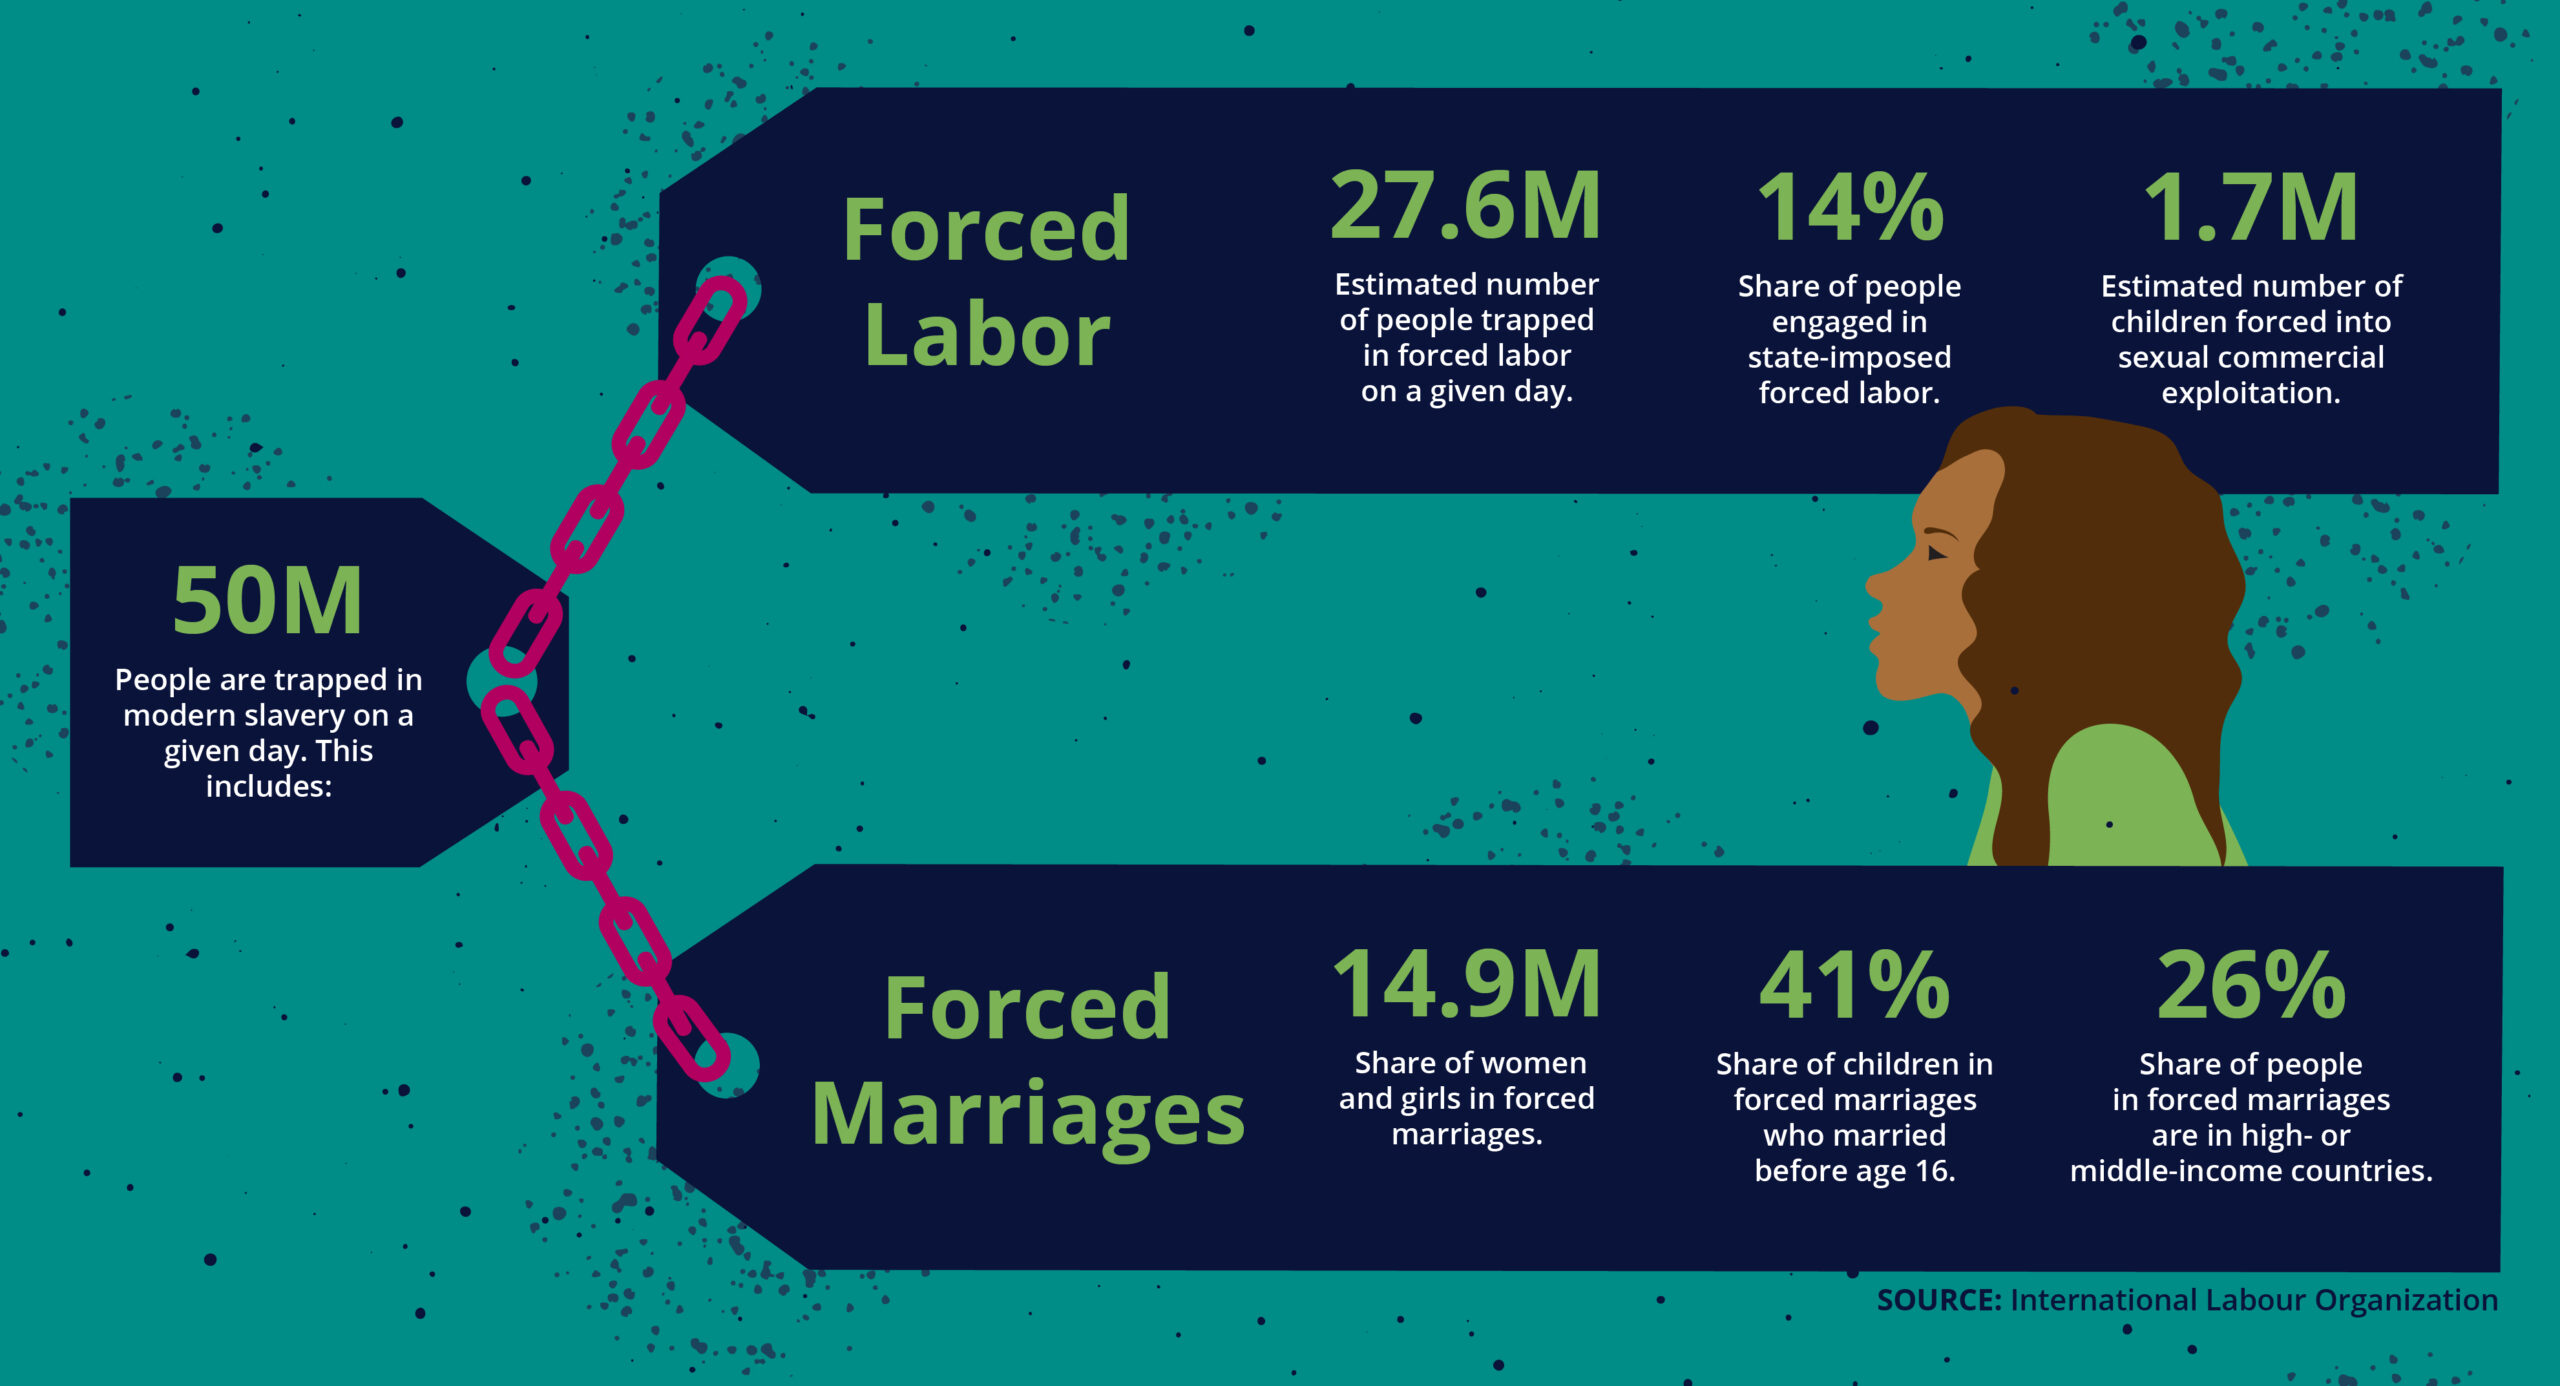 Illustration outlining human trafficking data from International Labour Organization showing Forced Labor and Forced Marriage statistics with woman in the center of the image